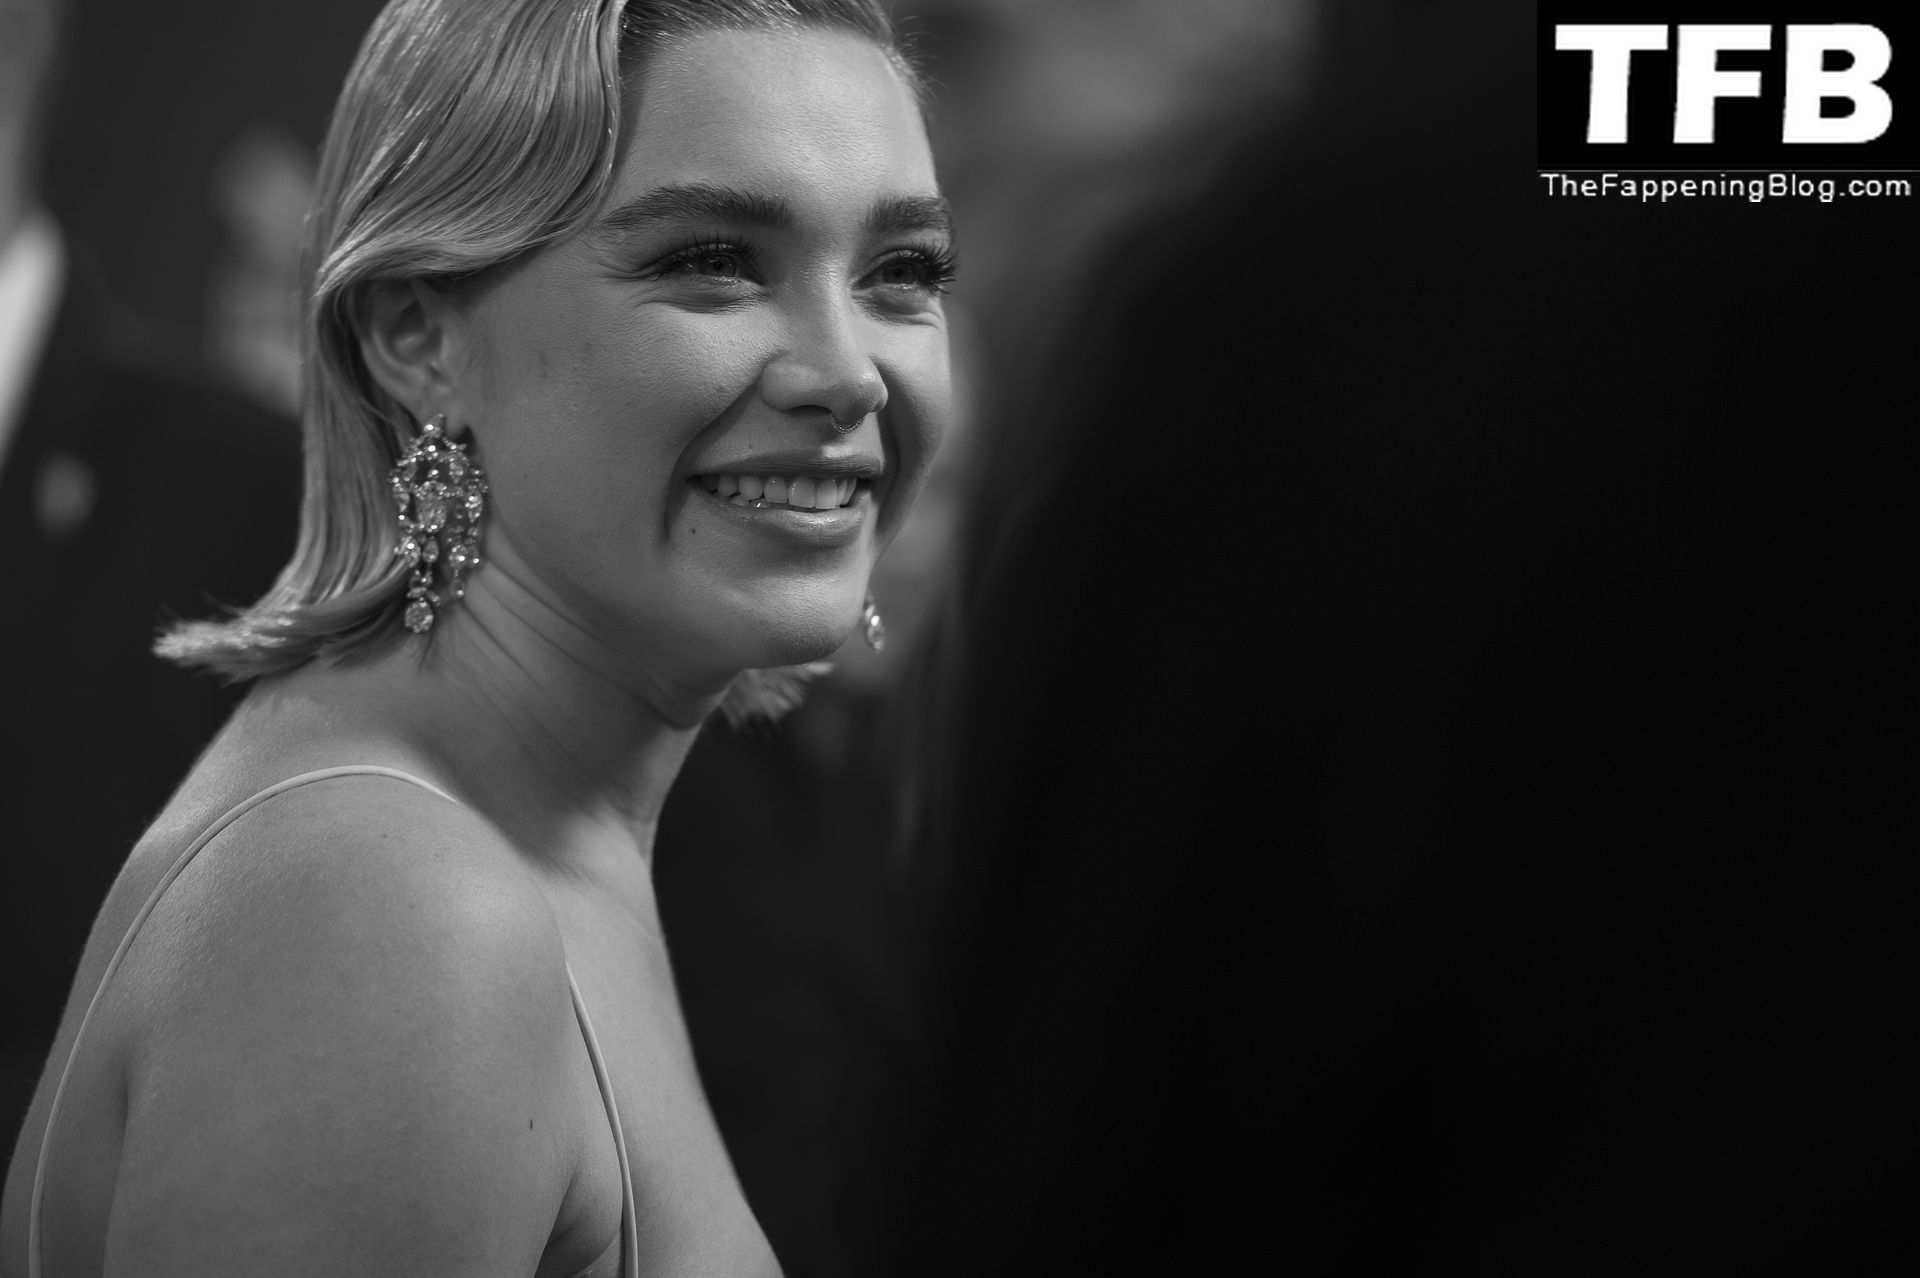 Florence-Pugh-Sexy-The-Fappening-Blog-132.jpg